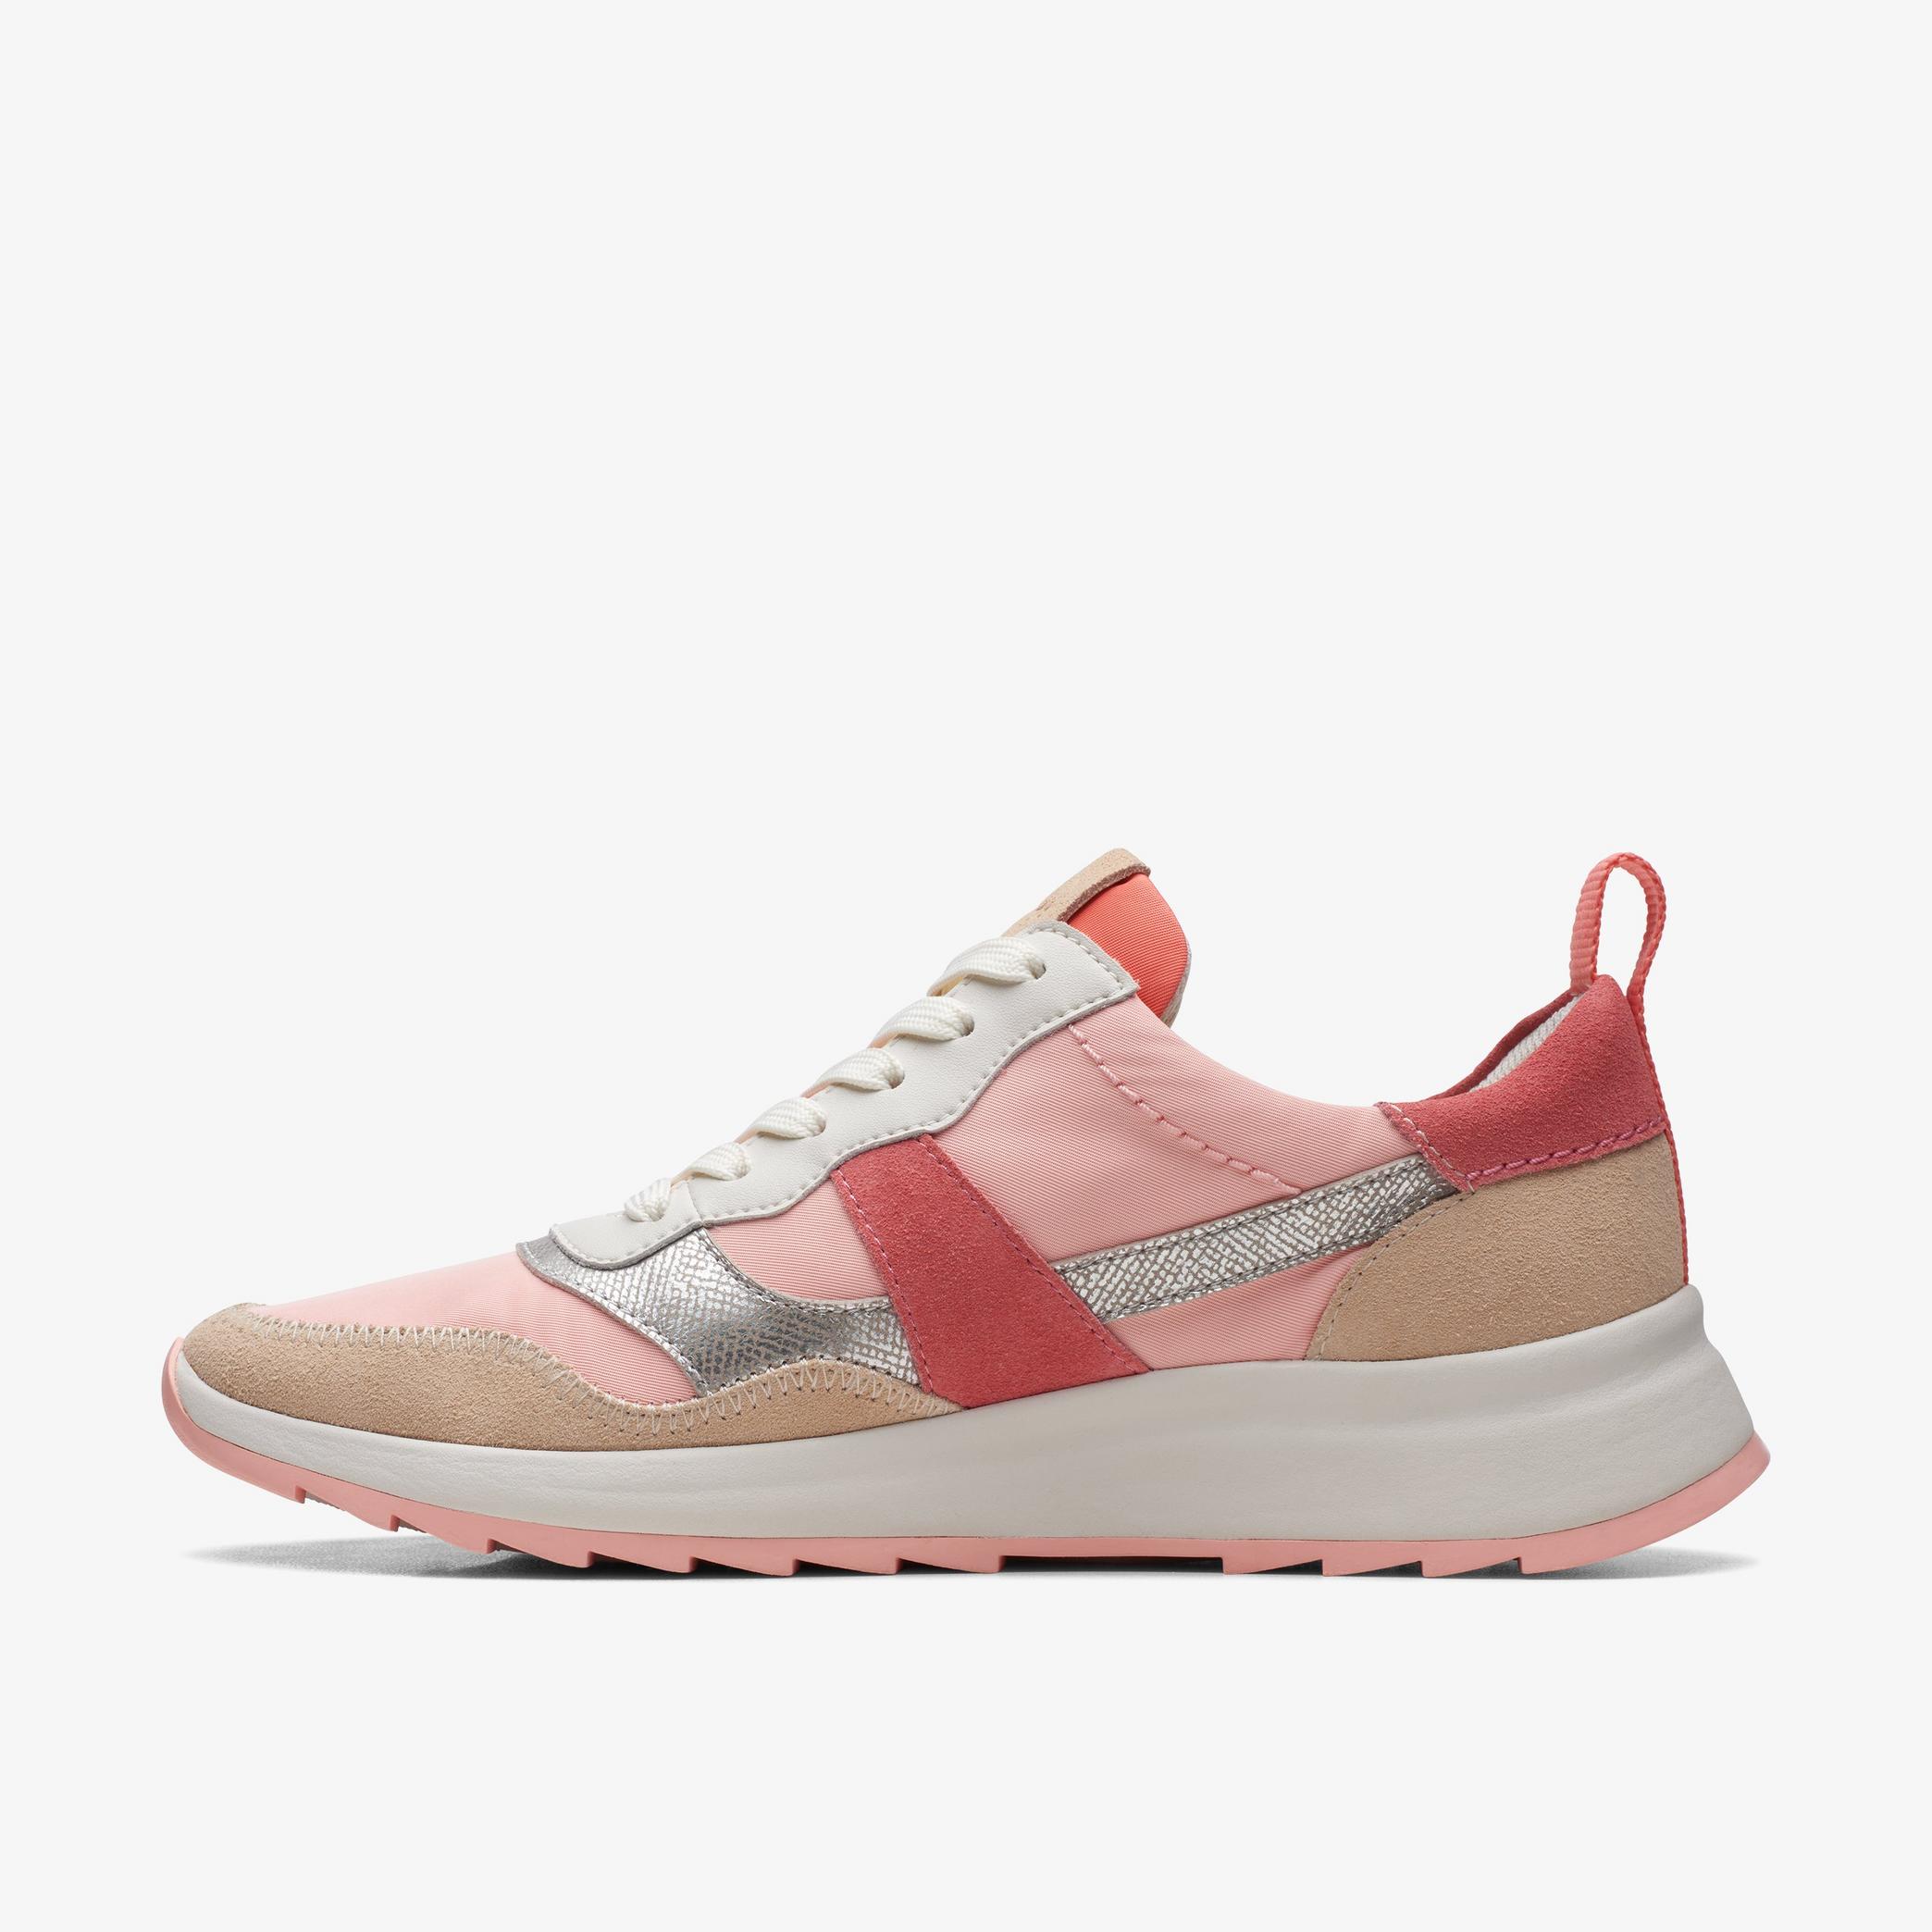 WOMENS Dash Lite Jazz Pale Peach Combination Trainers | Clarks Outlet